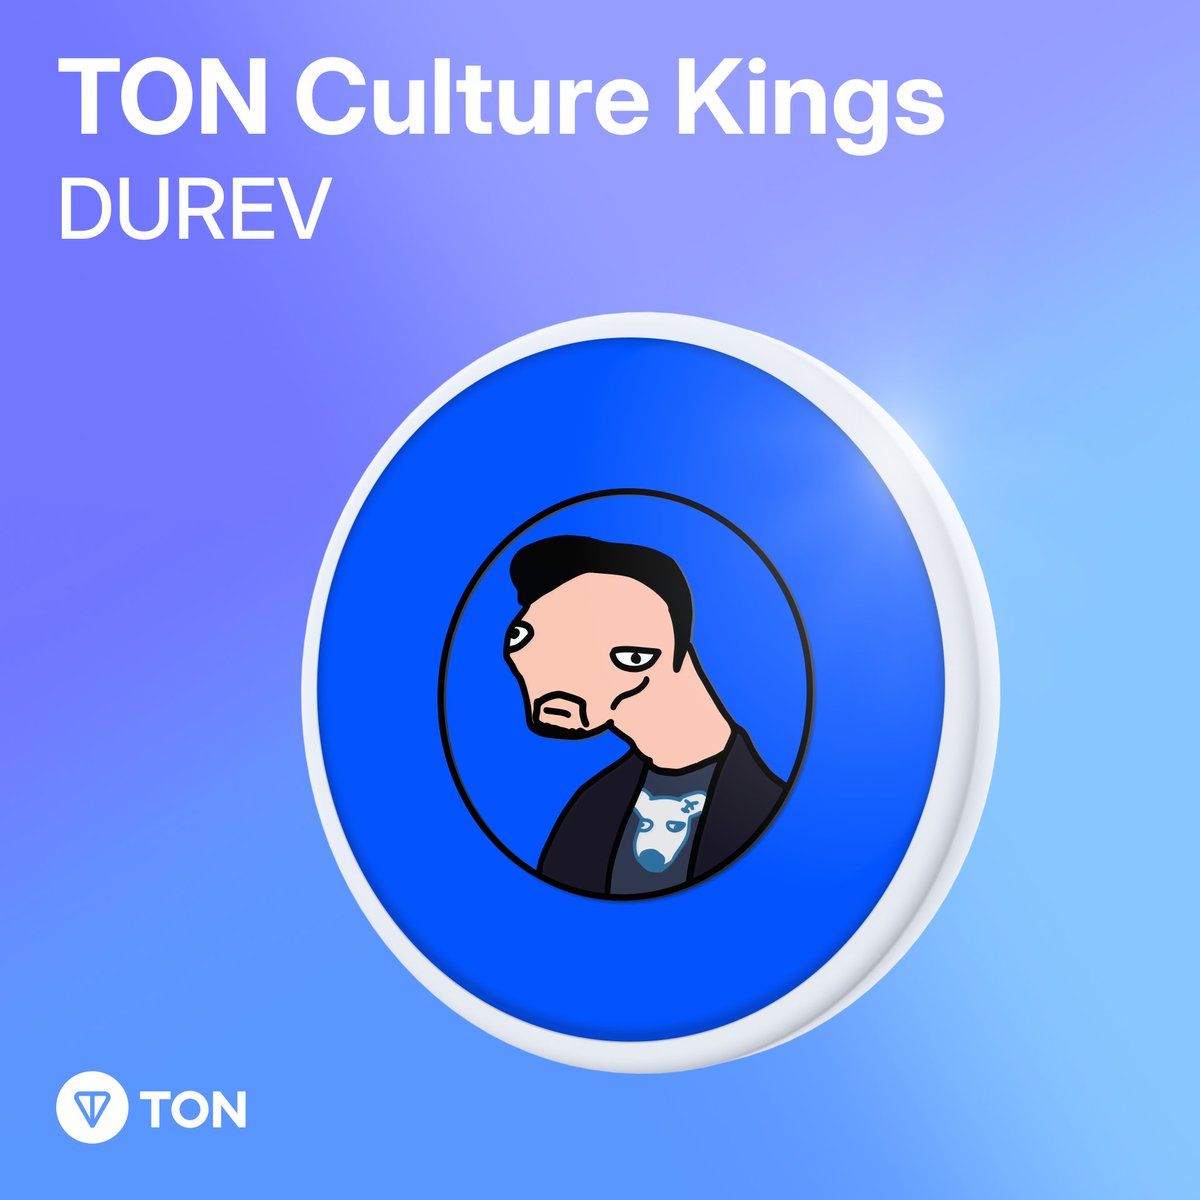 💫Welcome to TON Culture Kings, where memecoins reign supreme! 👑 ✨Join us as we delve into the fascinating world of TON Blockchain's weird and wonderful creations! 🤯 Today, @PovelDurev takes center stage with DUREV 💎 For more info: ⬇️ blog.ton.org/ton-culture-ki…